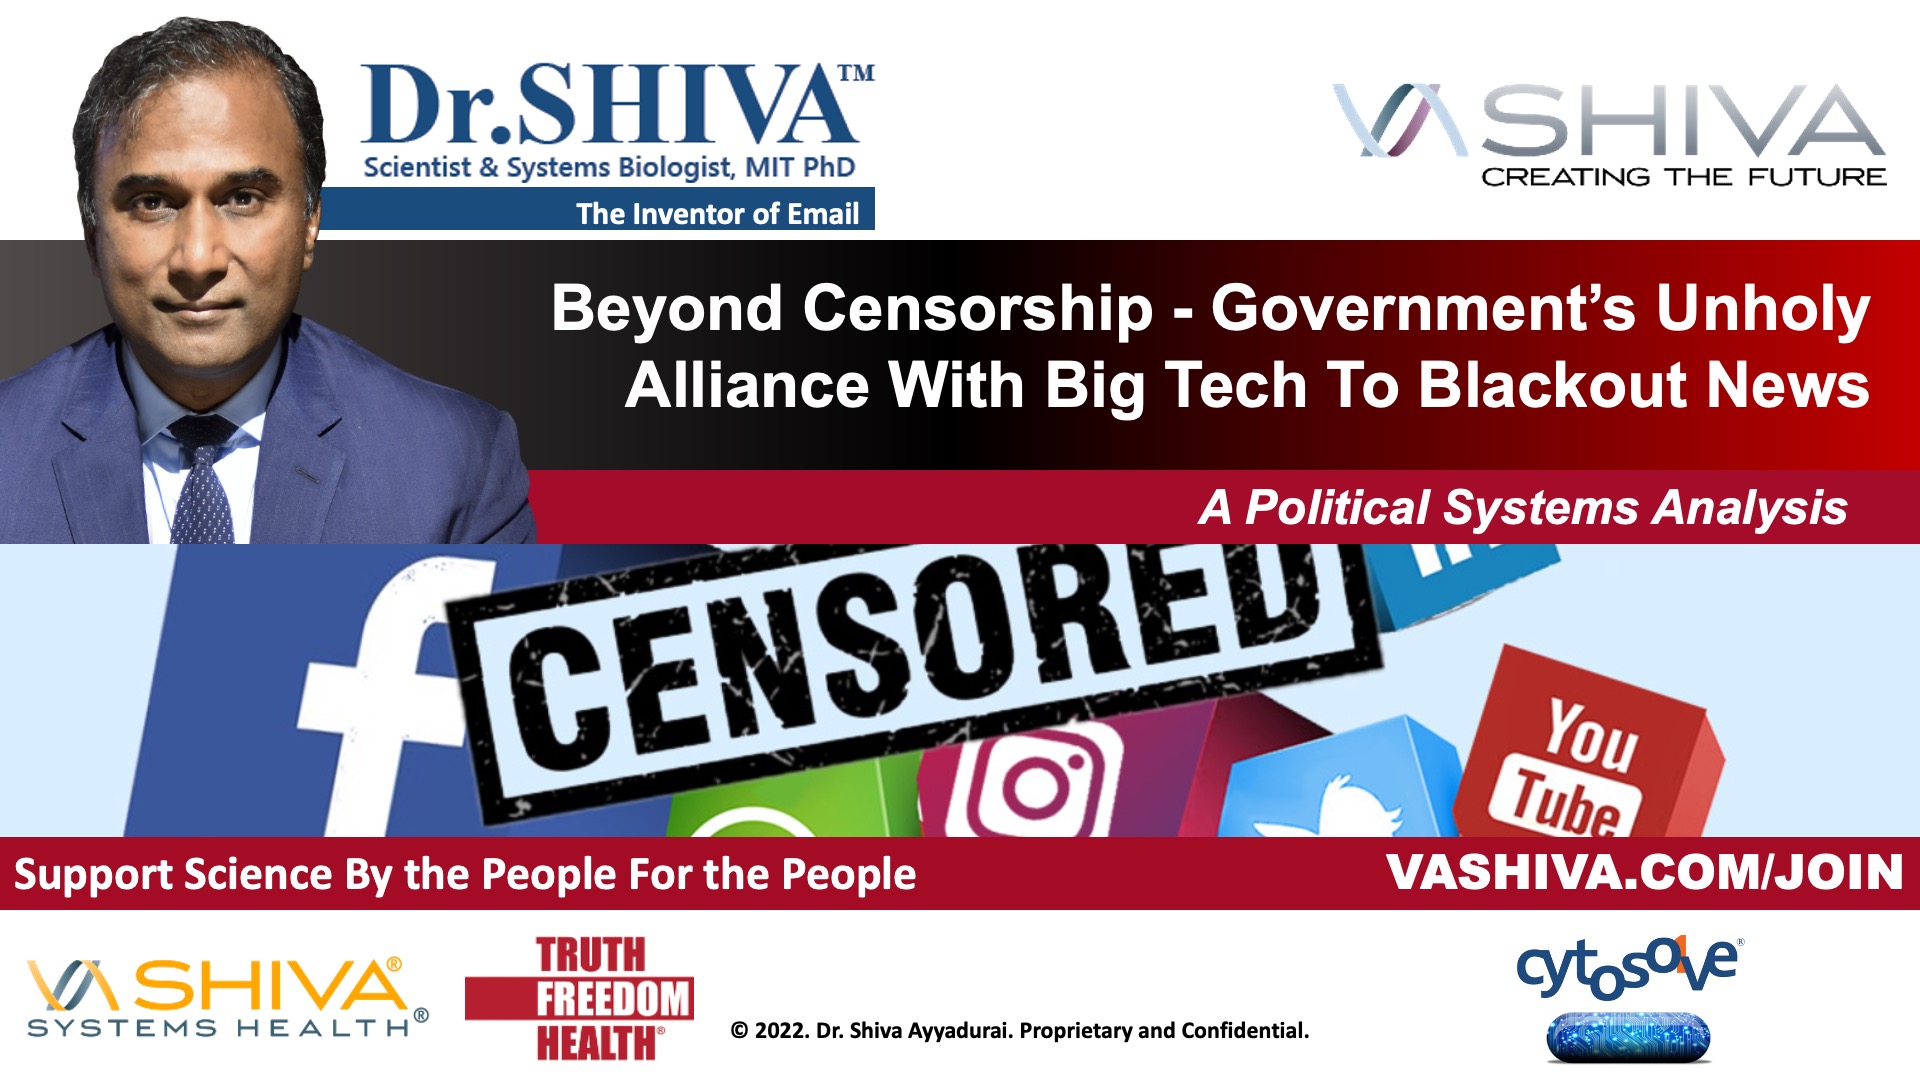 Dr.SHIVA LIVE: Beyond Censorship - Government's Unholy Alliance With Big Tech to Blackout News